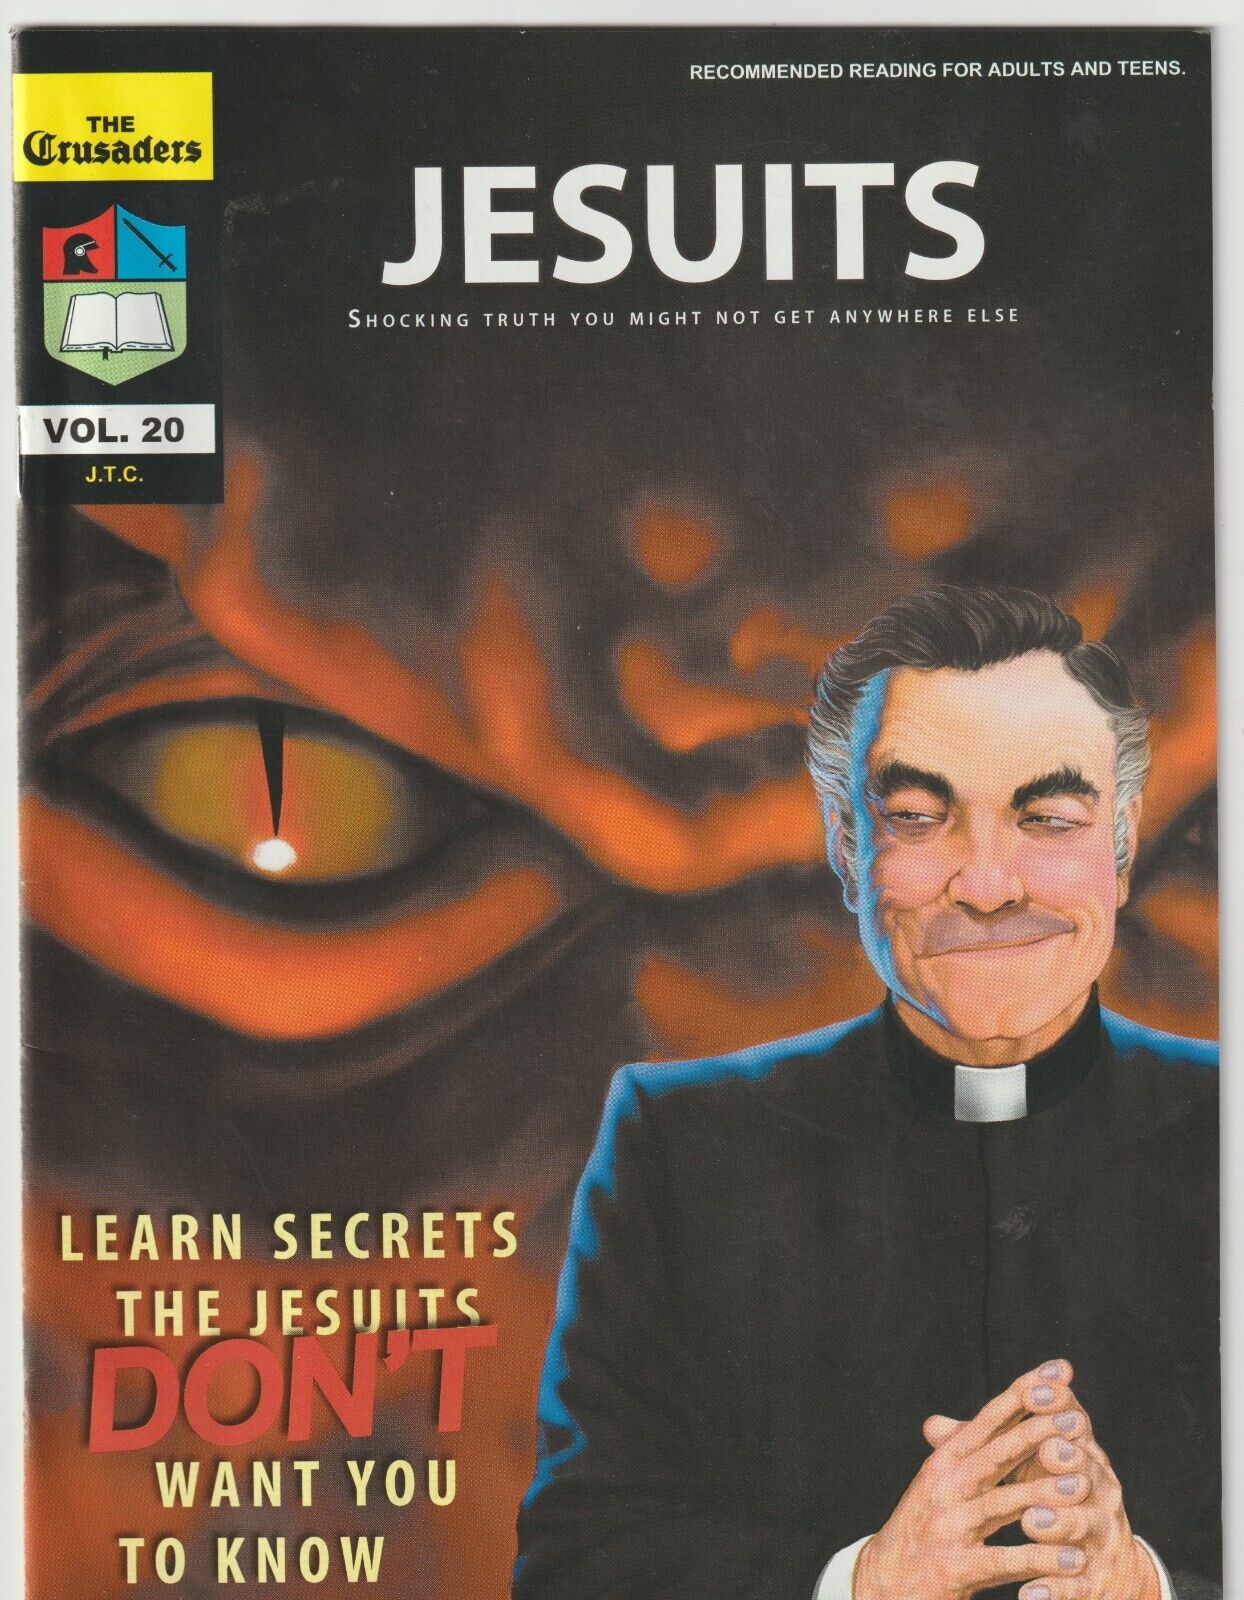 JESUITS The Crusaders Jack Chick comic Vol. 20  With ATTACK Bible track from OK